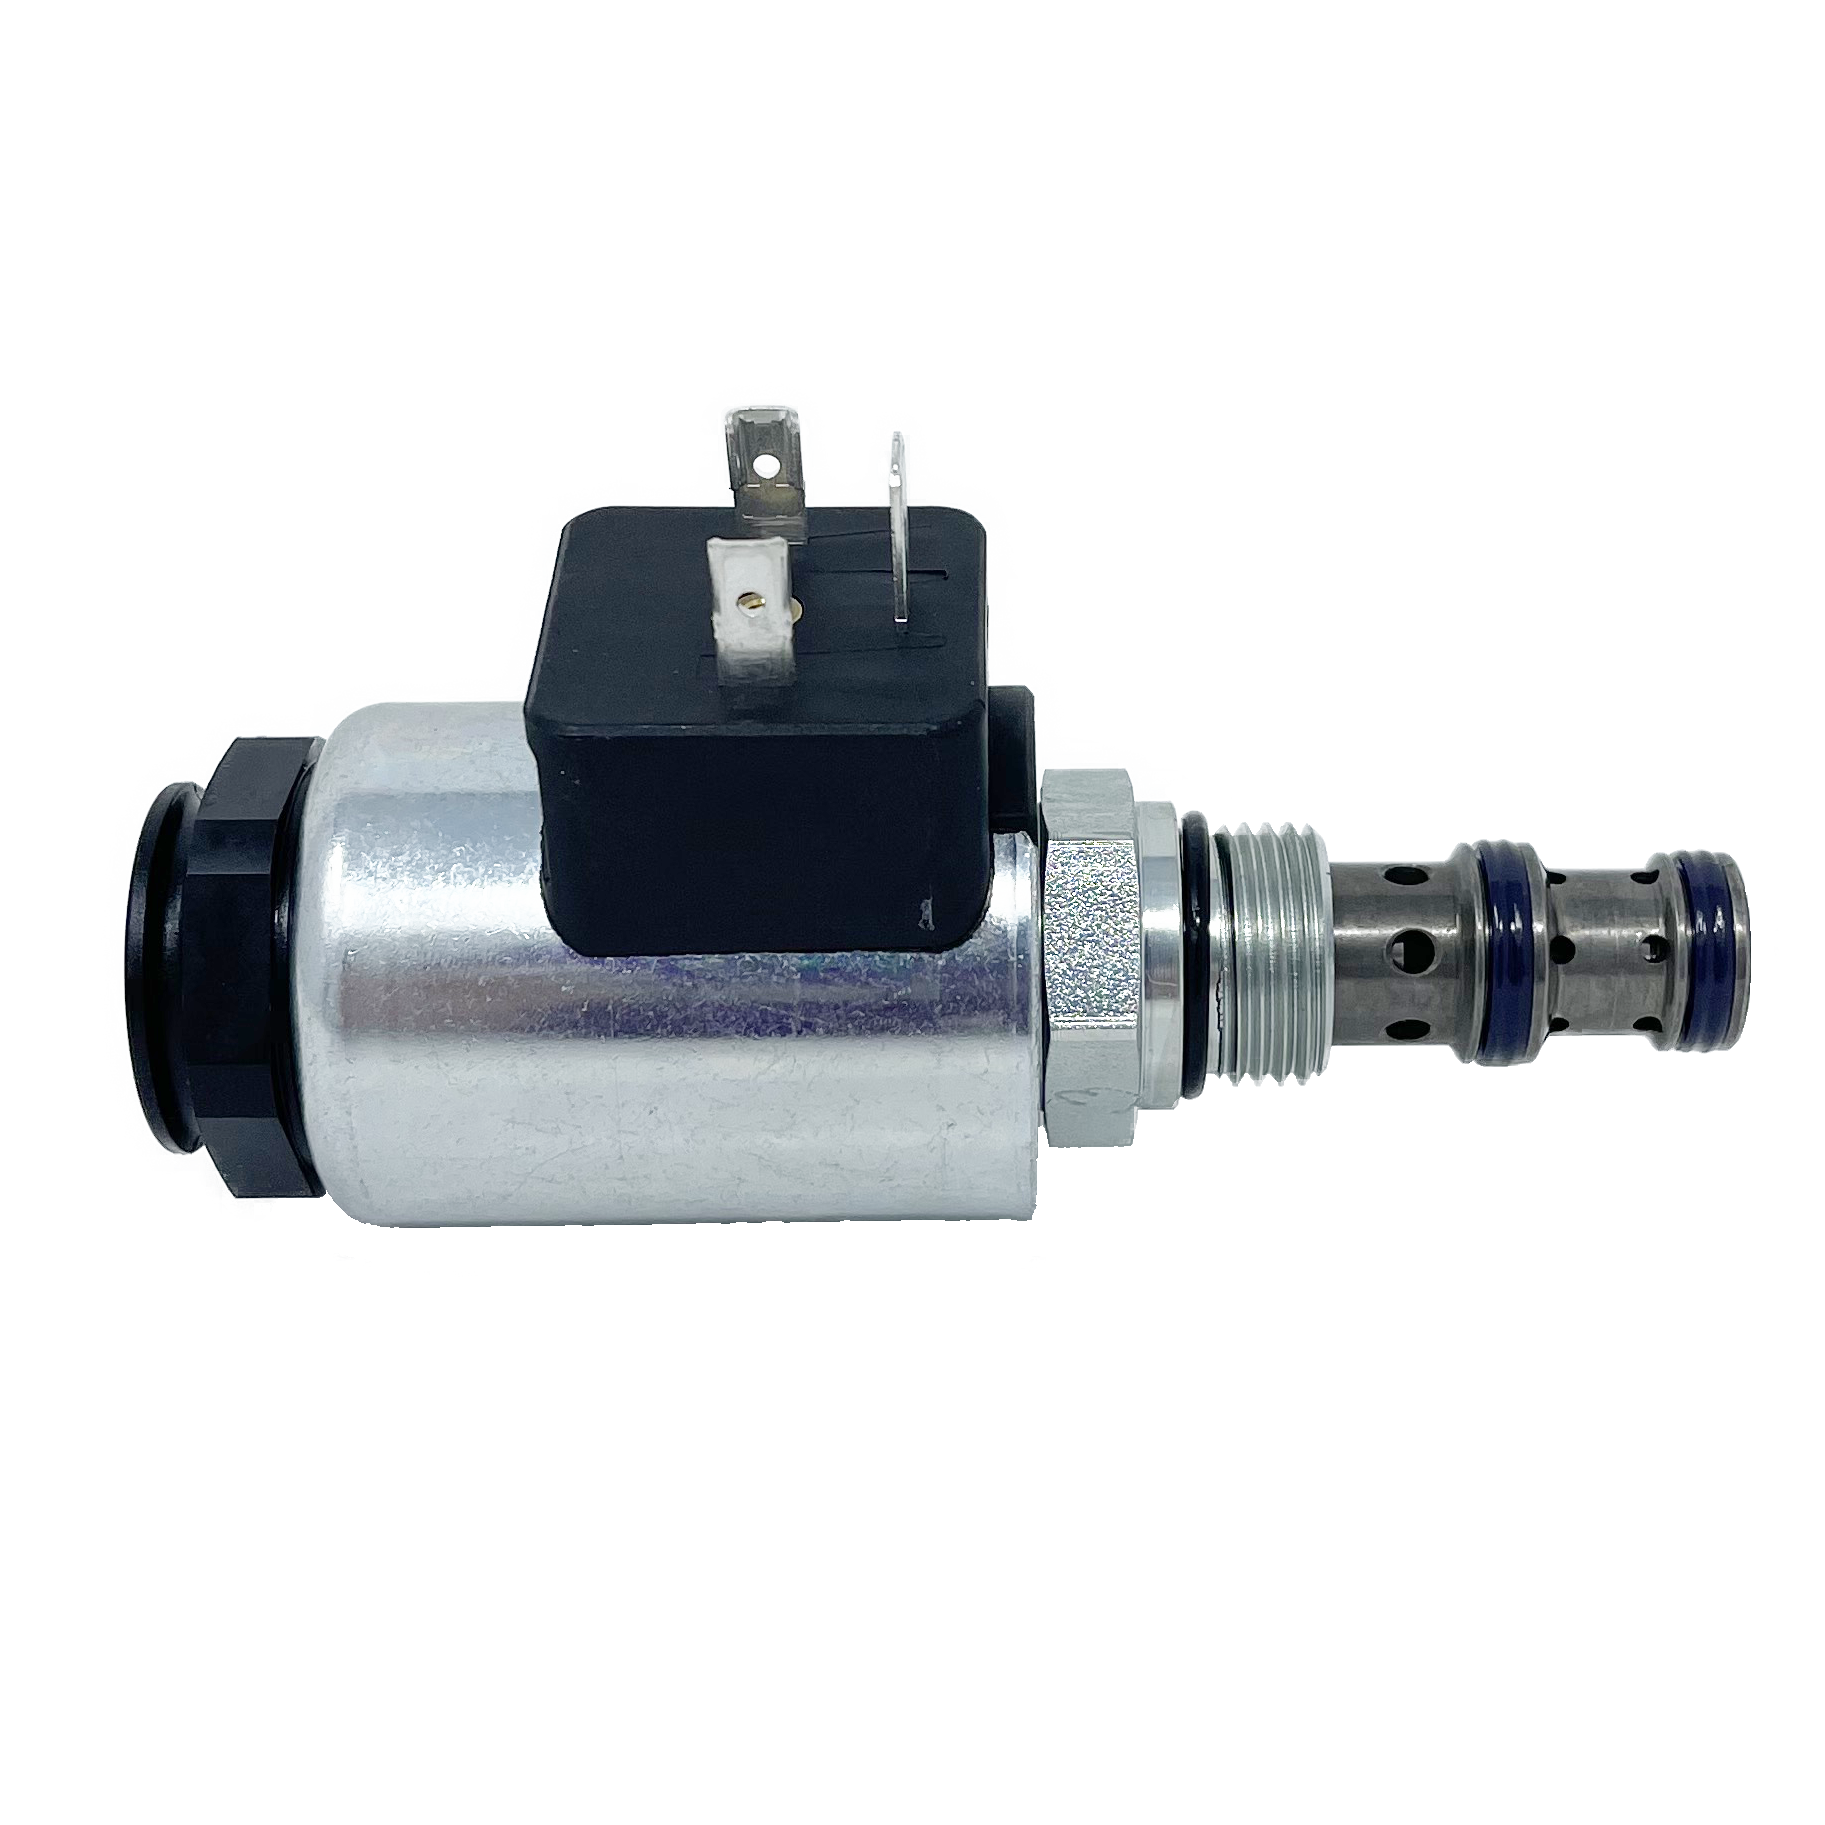 SD2E-A3/H2D21A-24DIN : Argo DCV, 8GPM, 5100psi, 2P3W, C-8-3, 24 VDC DIN, Port 3 Blocked, 2 to 1 Neutral